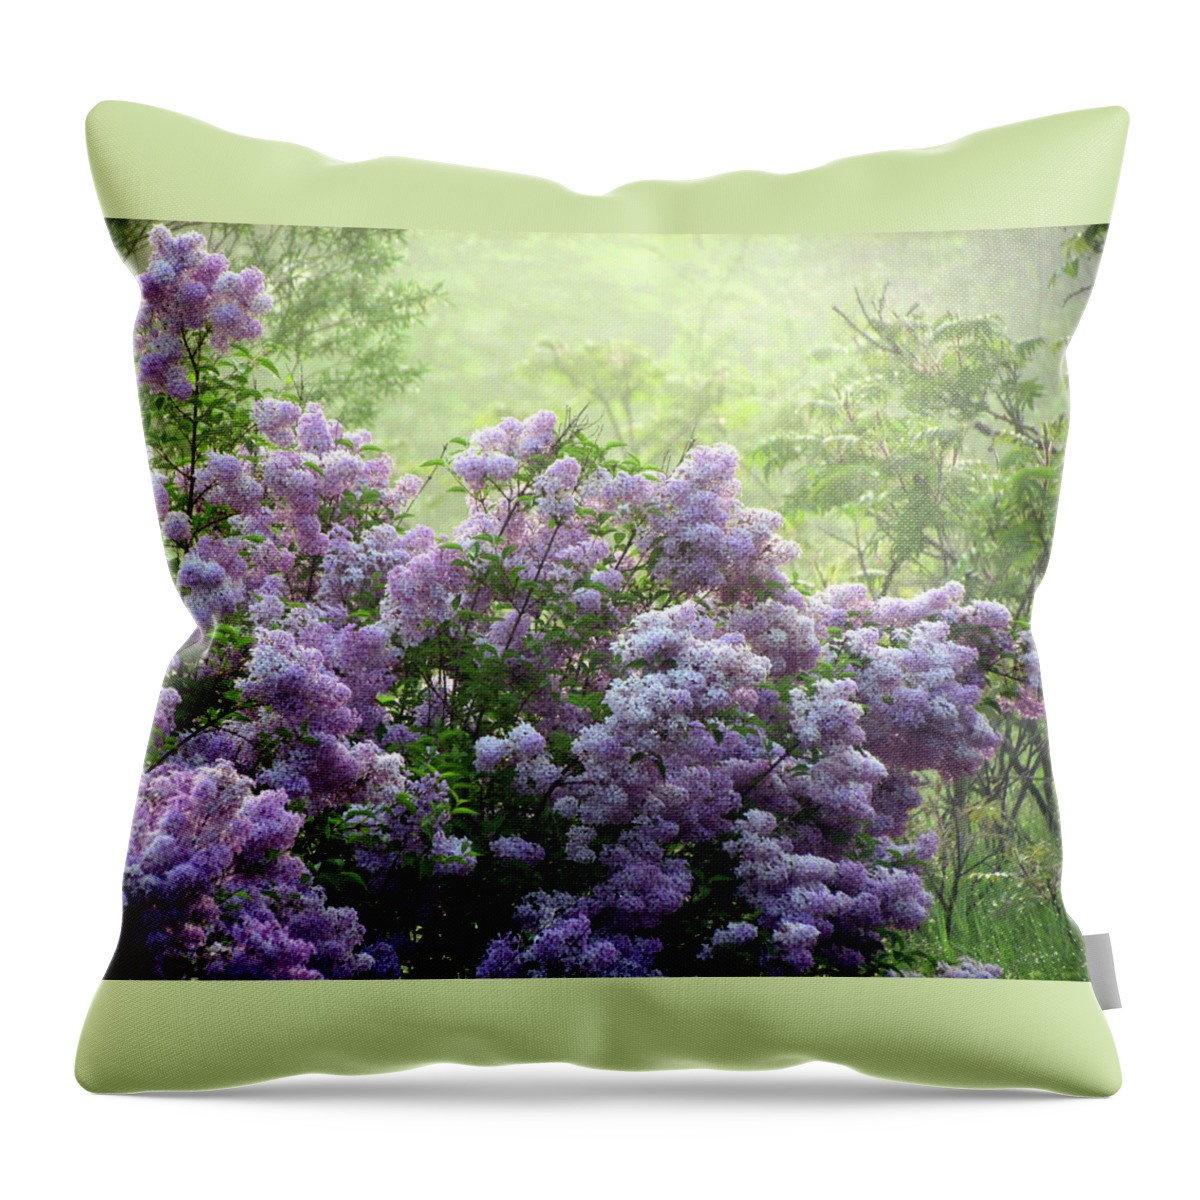 Fog Throw Pillow featuring the photograph The Scent of Lilacs by David T Wilkinson